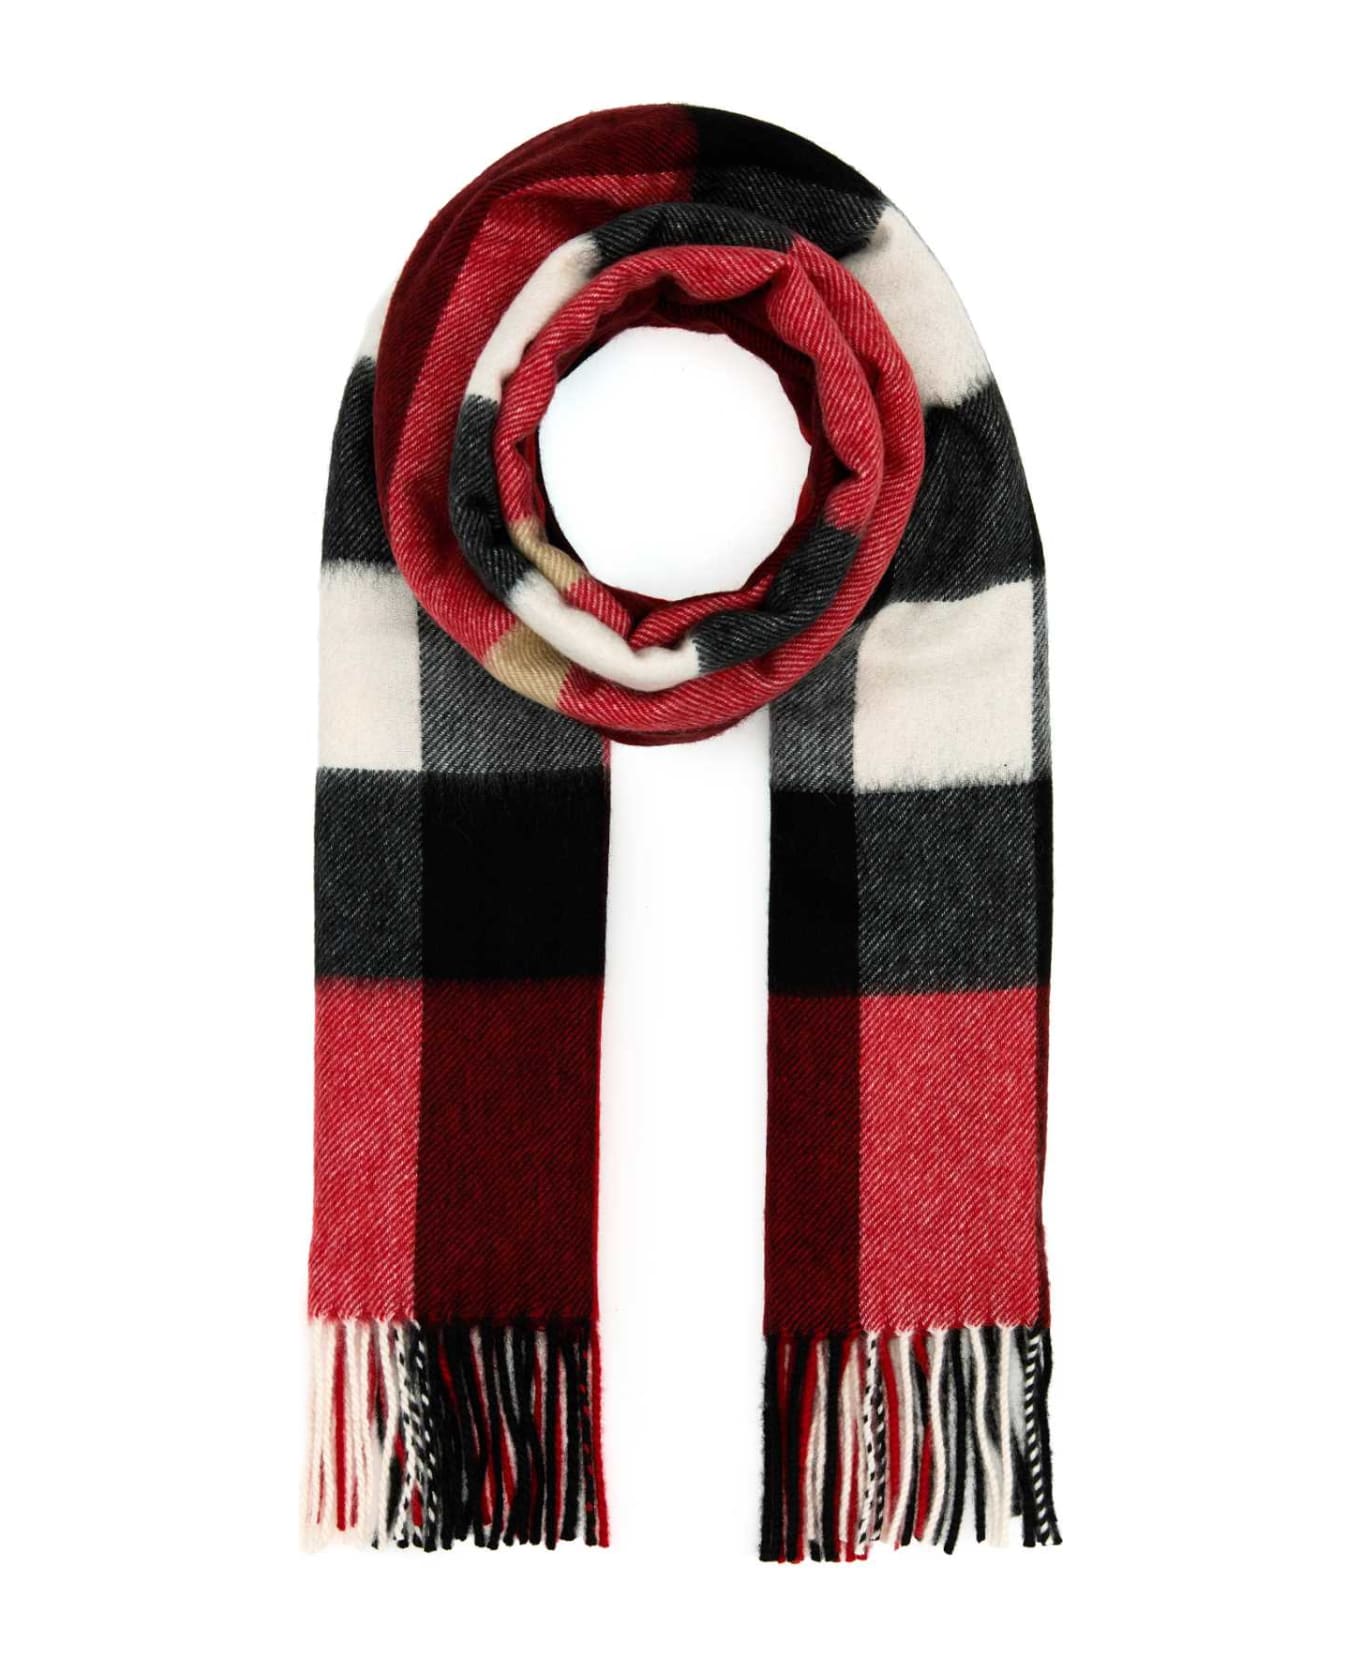 Burberry Embroidered Cashmere Scarf - RED